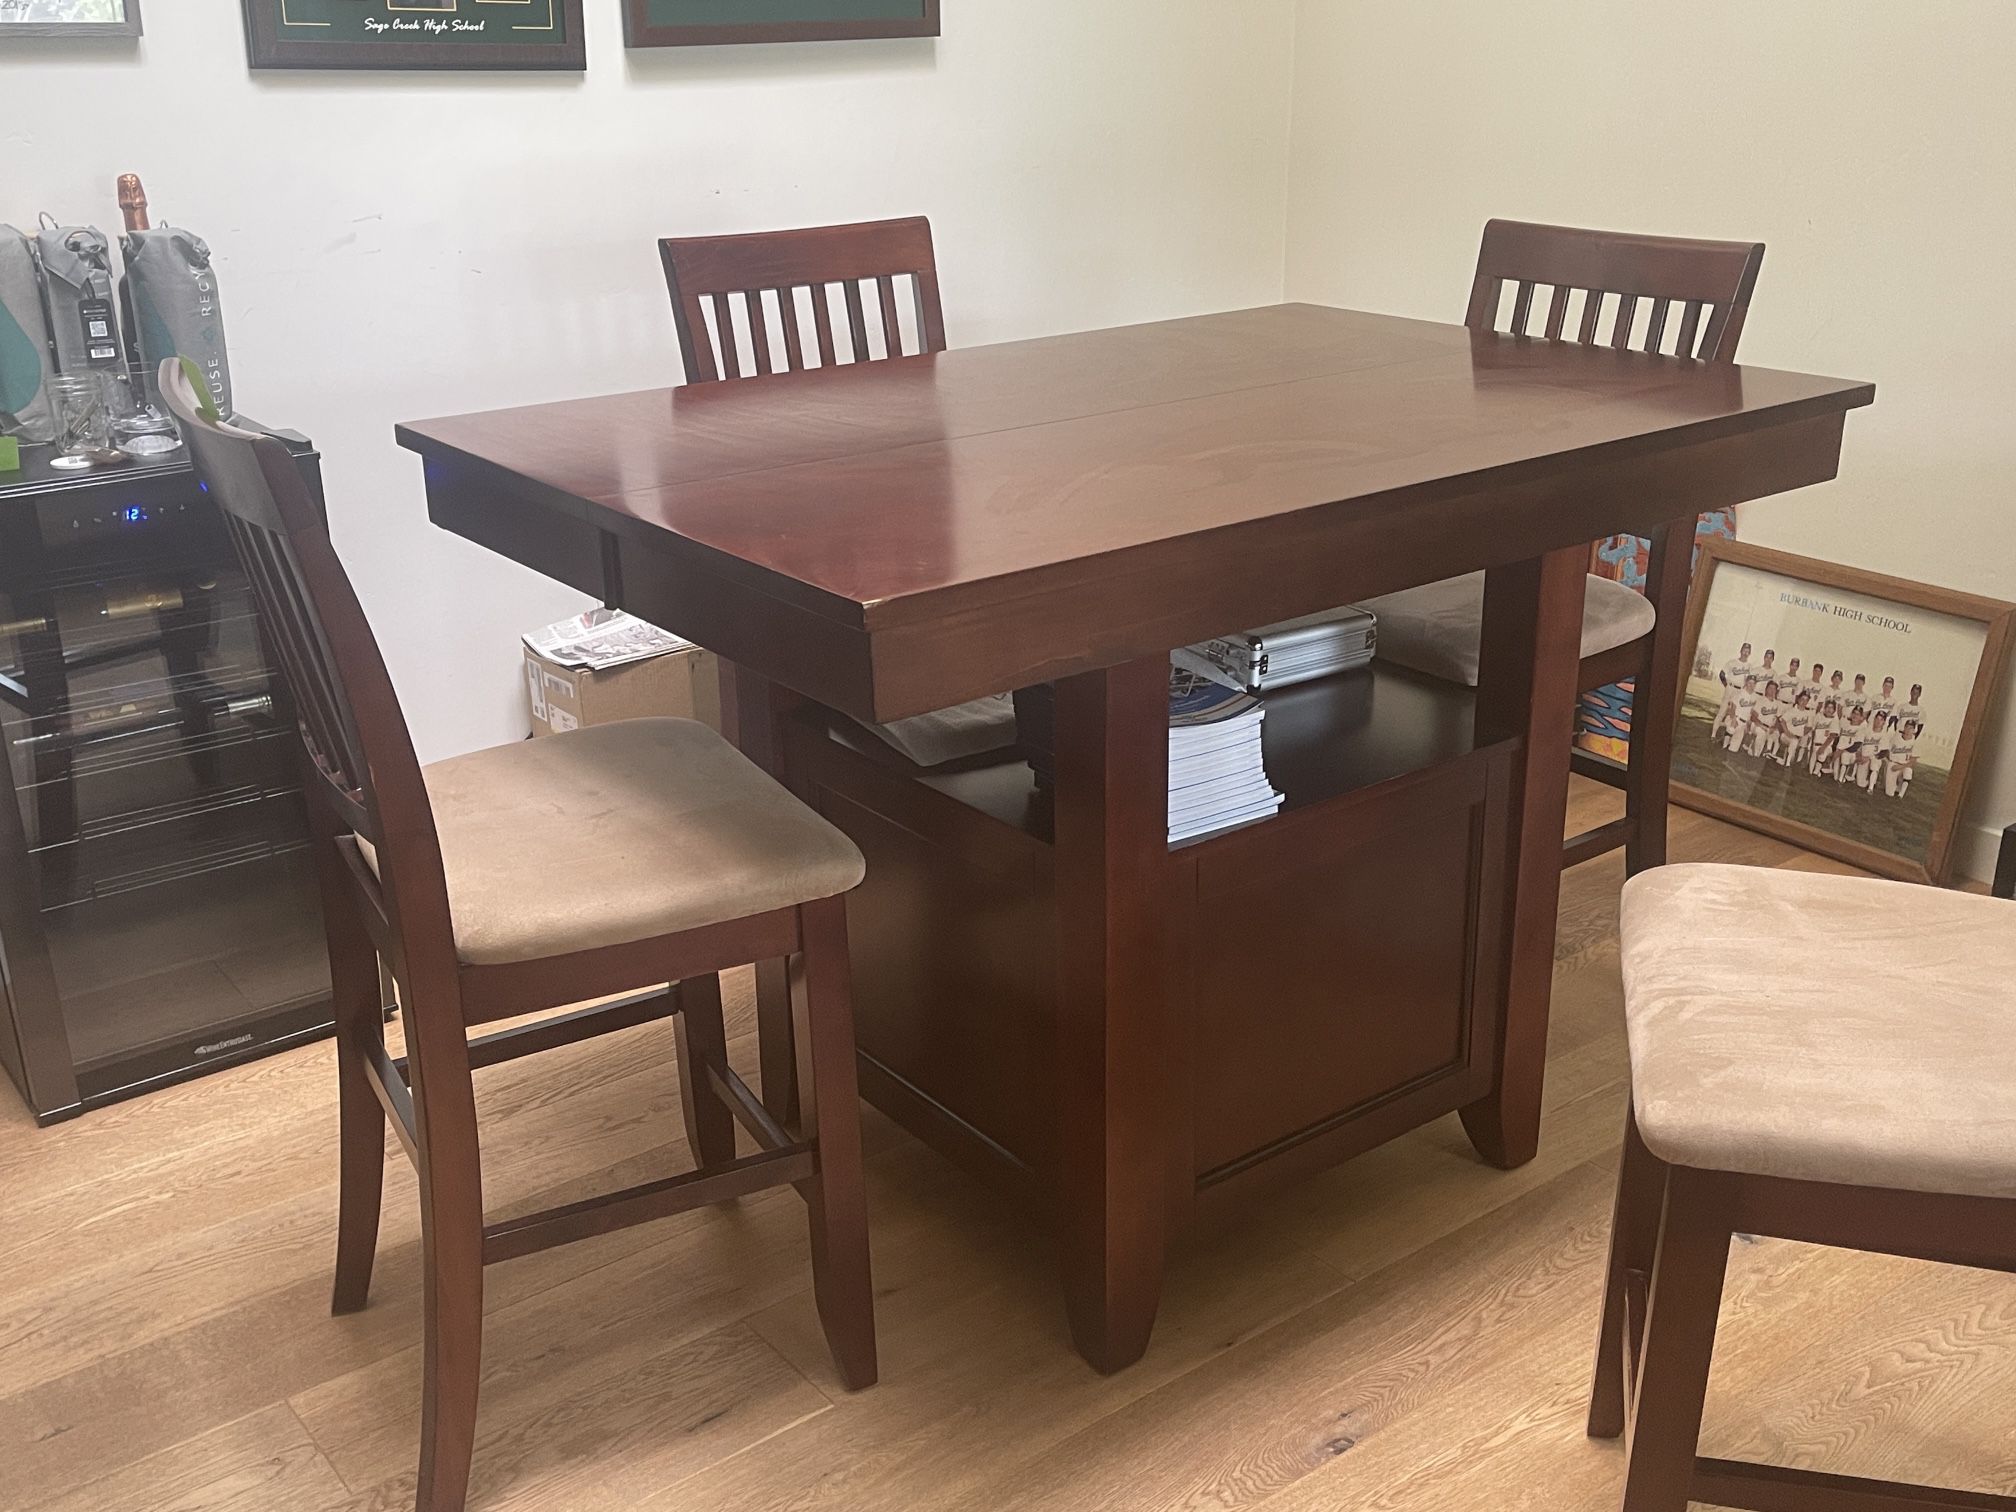 Dining Room Table w/ 4 Chairs